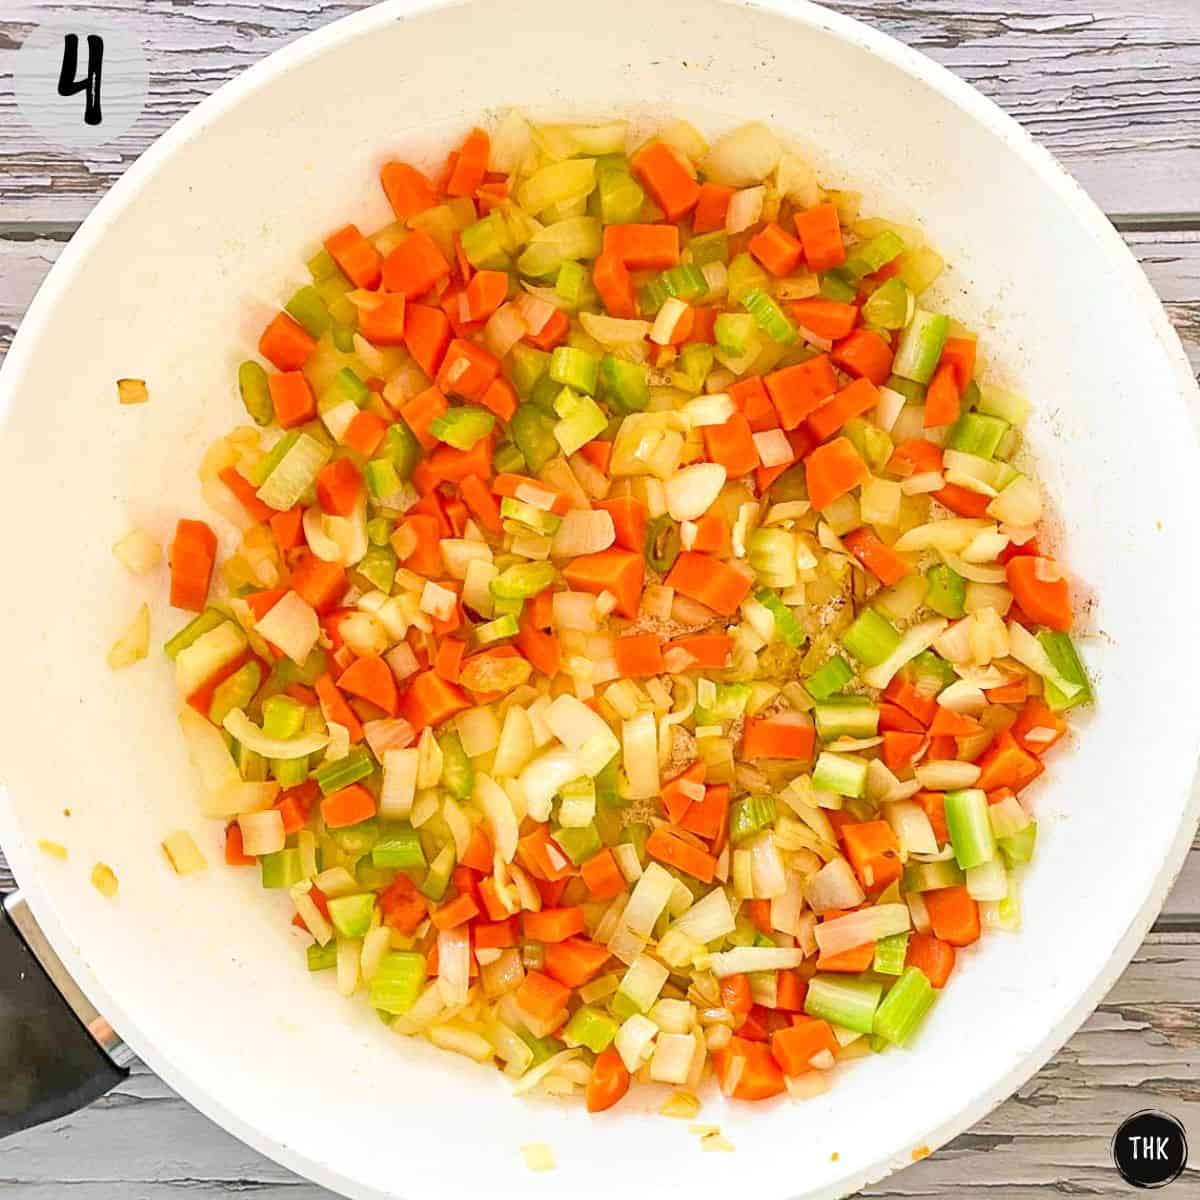 Sautéed onion, carrot and celery in pan.